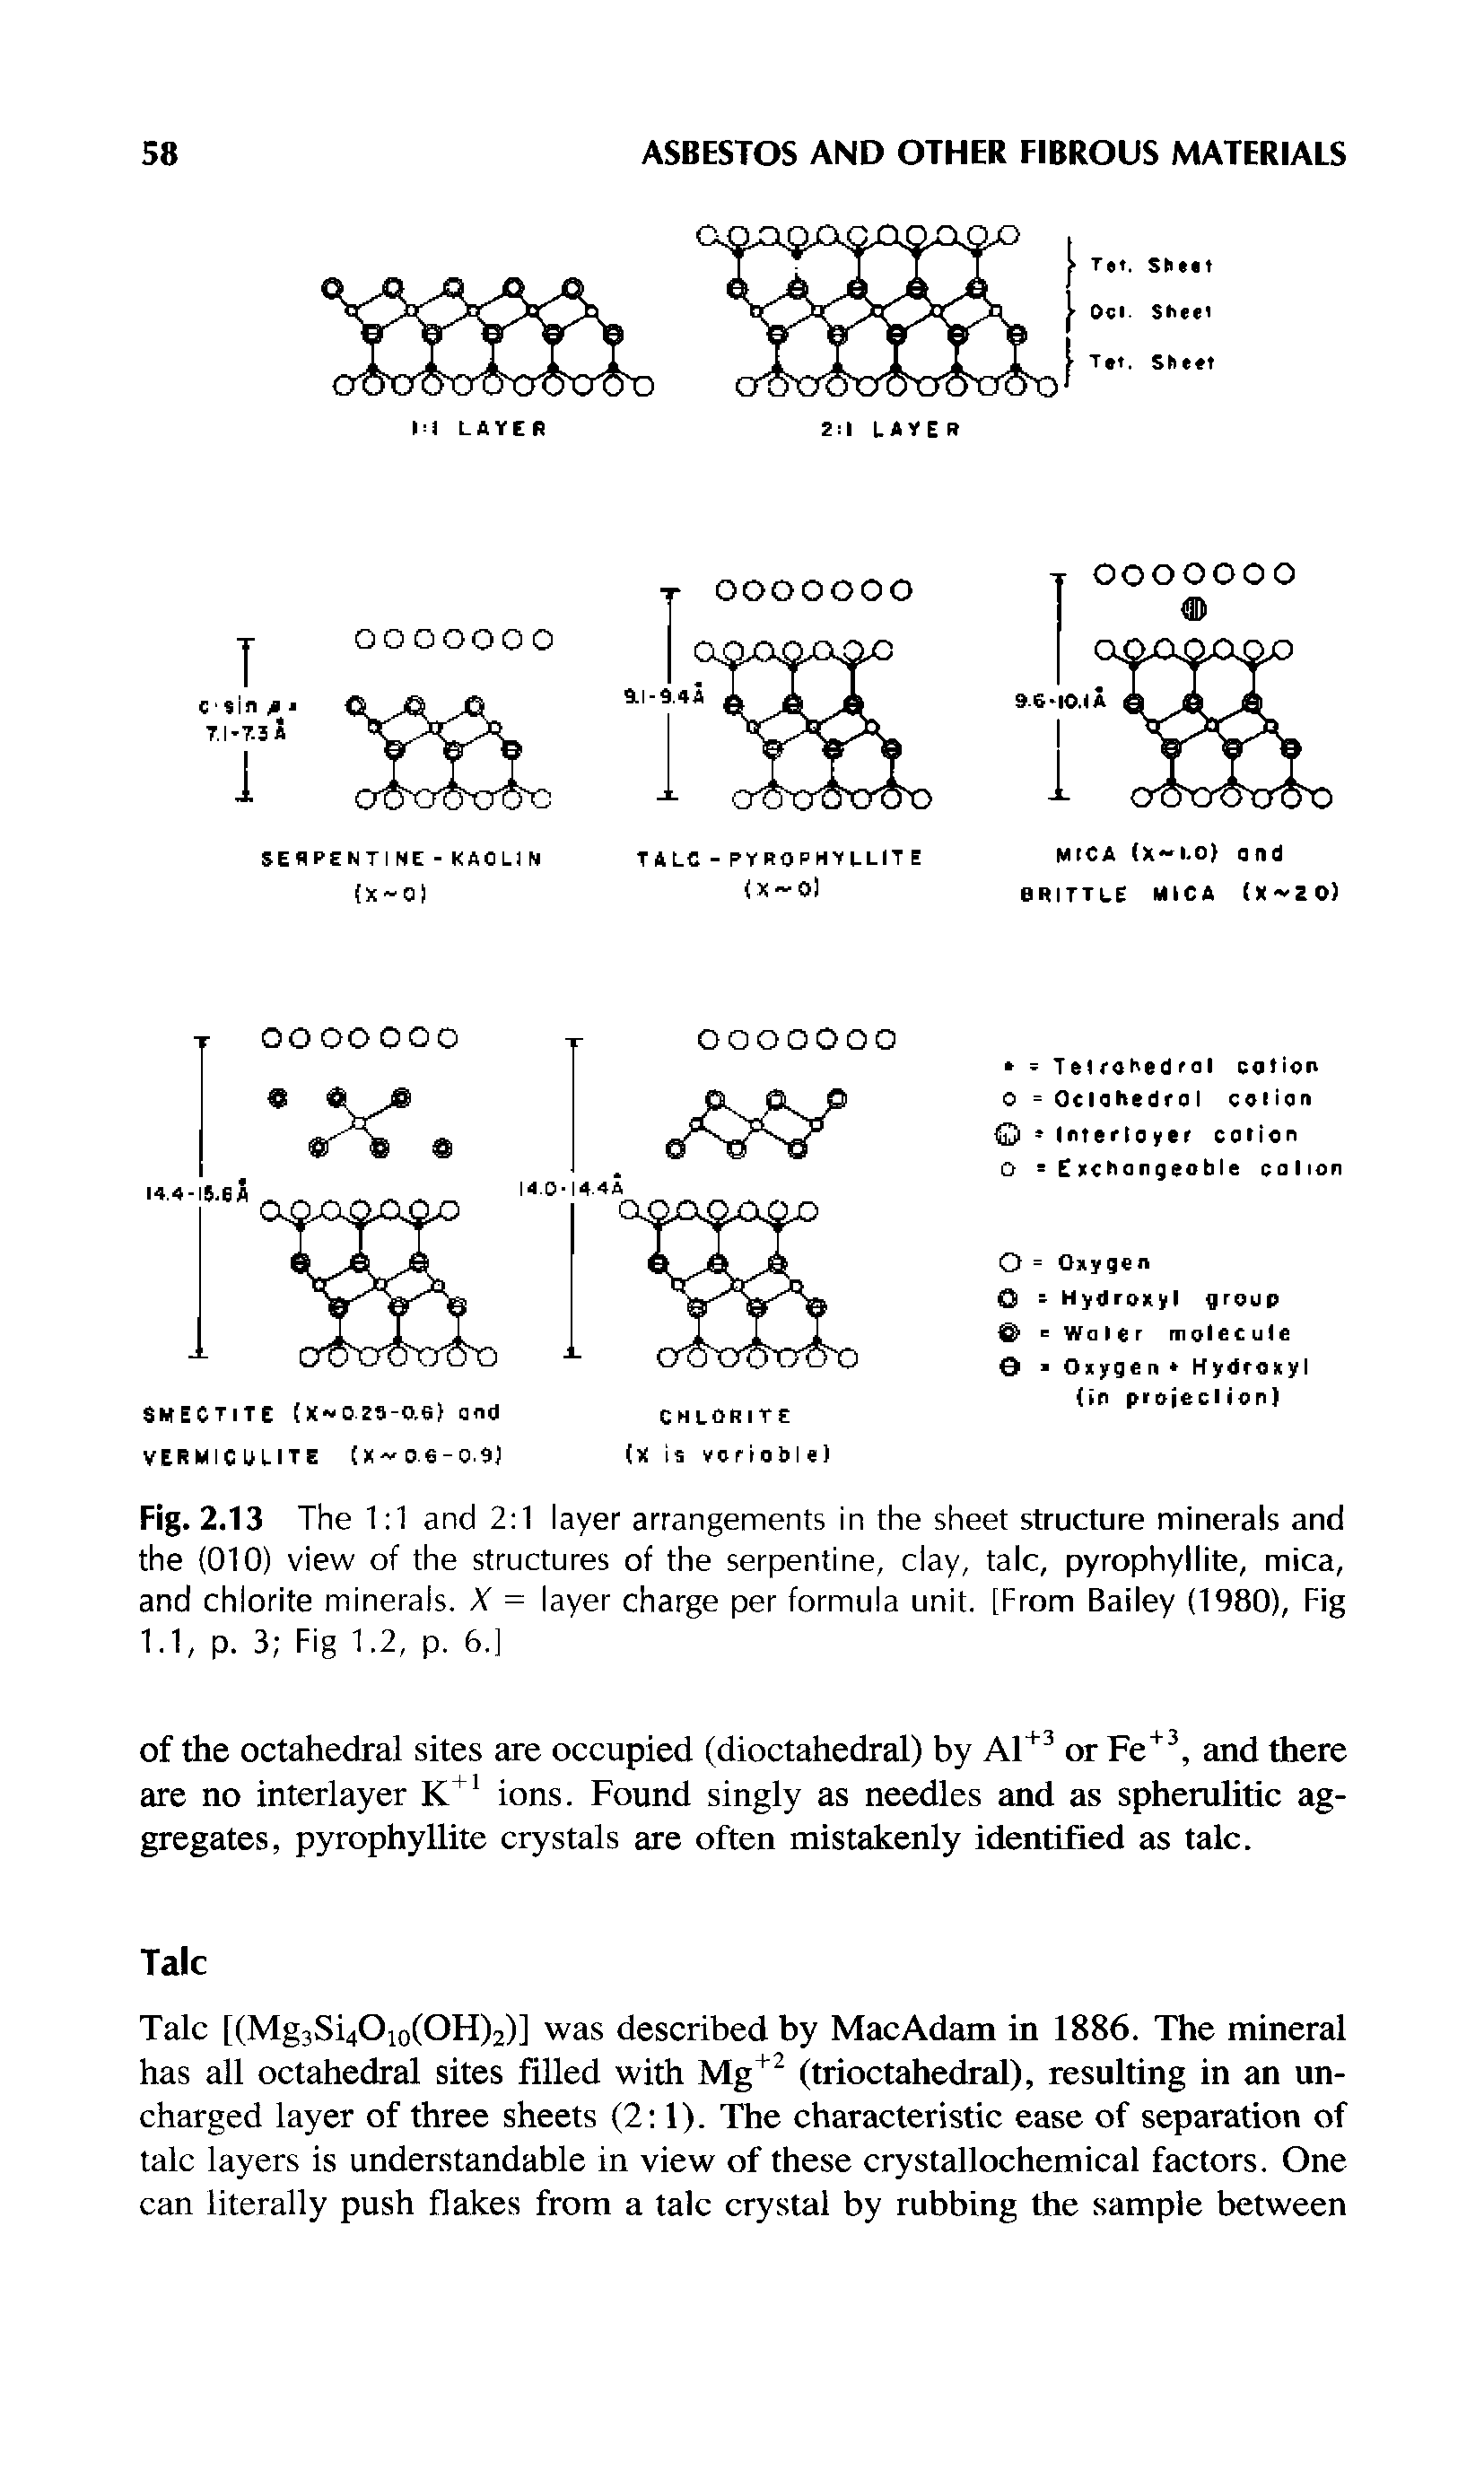 Fig. 2.13 The 1 1 and 2 1 layer arrangements in the sheet structure minerals and the (010) view of the structures of the serpentine, clay, talc, pyrophyllite, mica, and chlorite minerals. X = layer charge per formula unit. [From Bailey (1980), Fig 1.1, p. 3 Fig 1.2, p. 6.1...